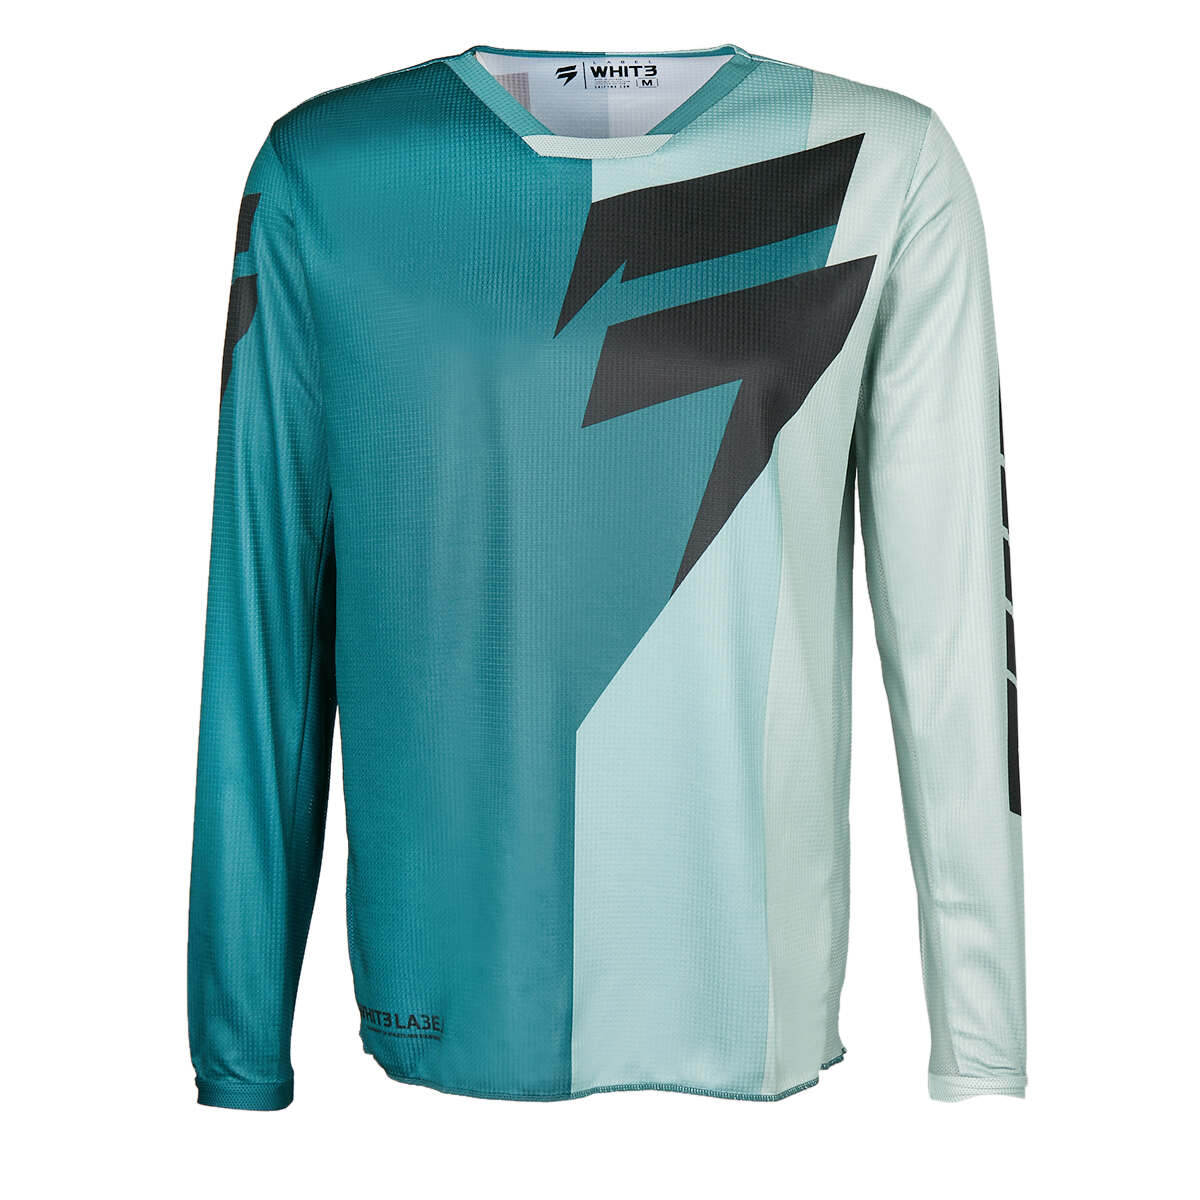 Shift Maillot MX Whit3 Label Tarmac - Teal